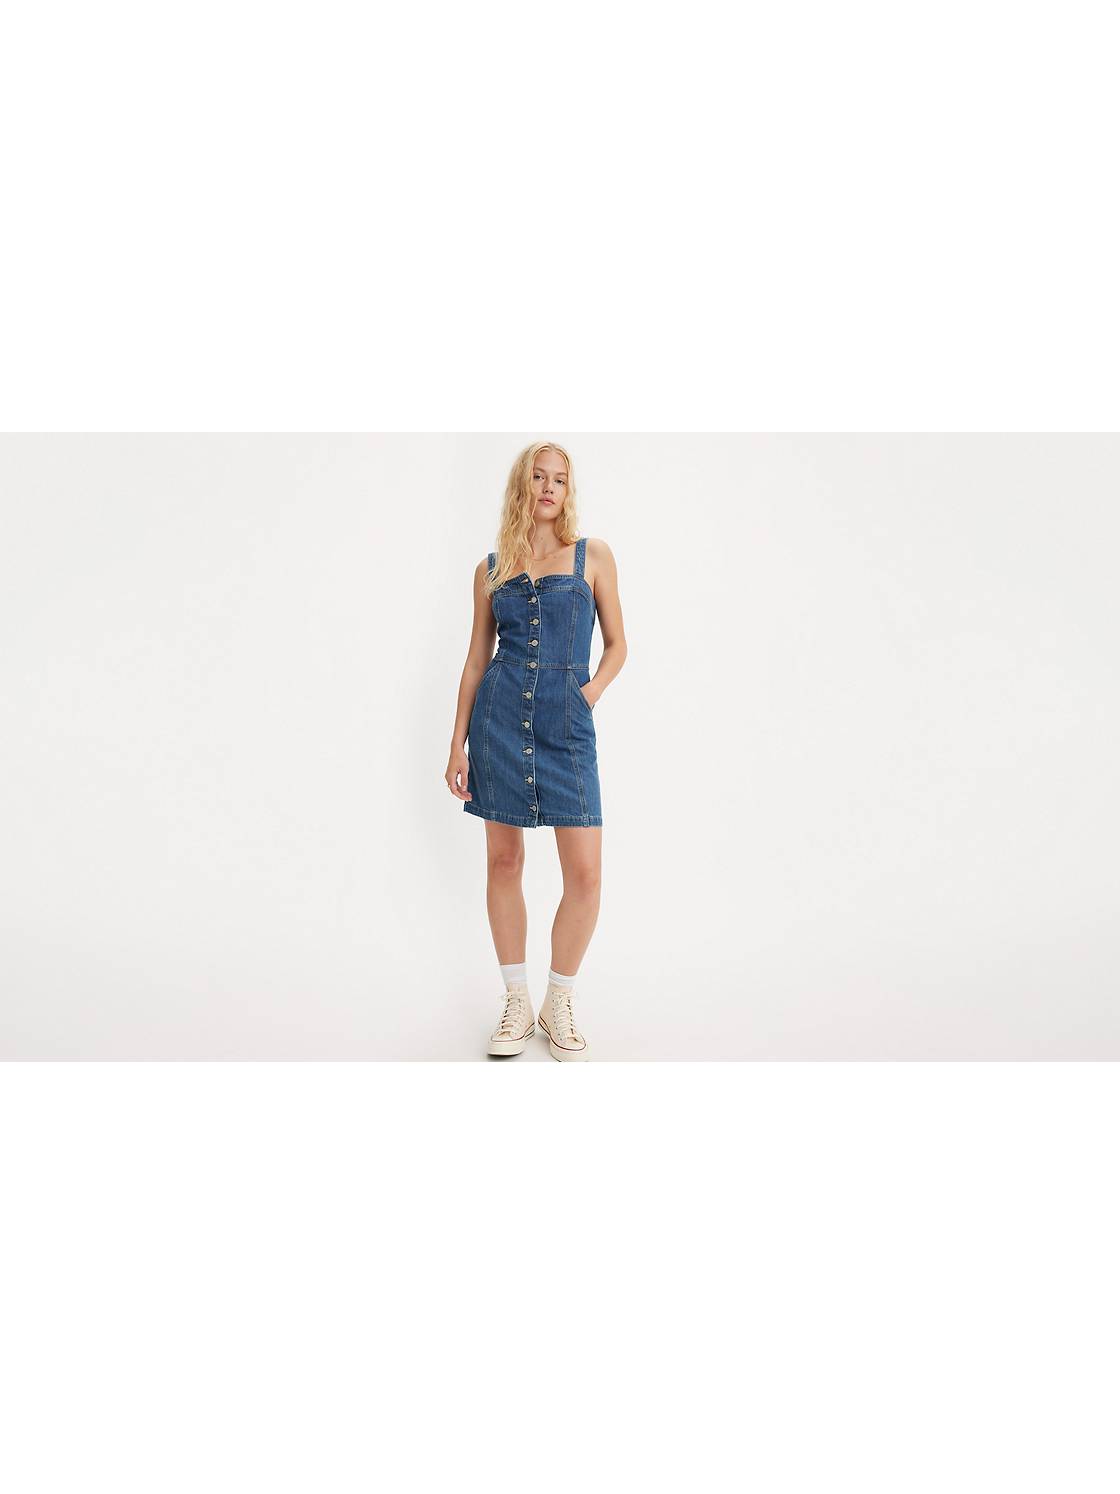  Plus Size Jumper Overall Dress for Women Fall Casual Midi  Length Long Jumpers Overall Pinafore Denim Jeans Dress Skirt (Blue, S) :  Clothing, Shoes & Jewelry